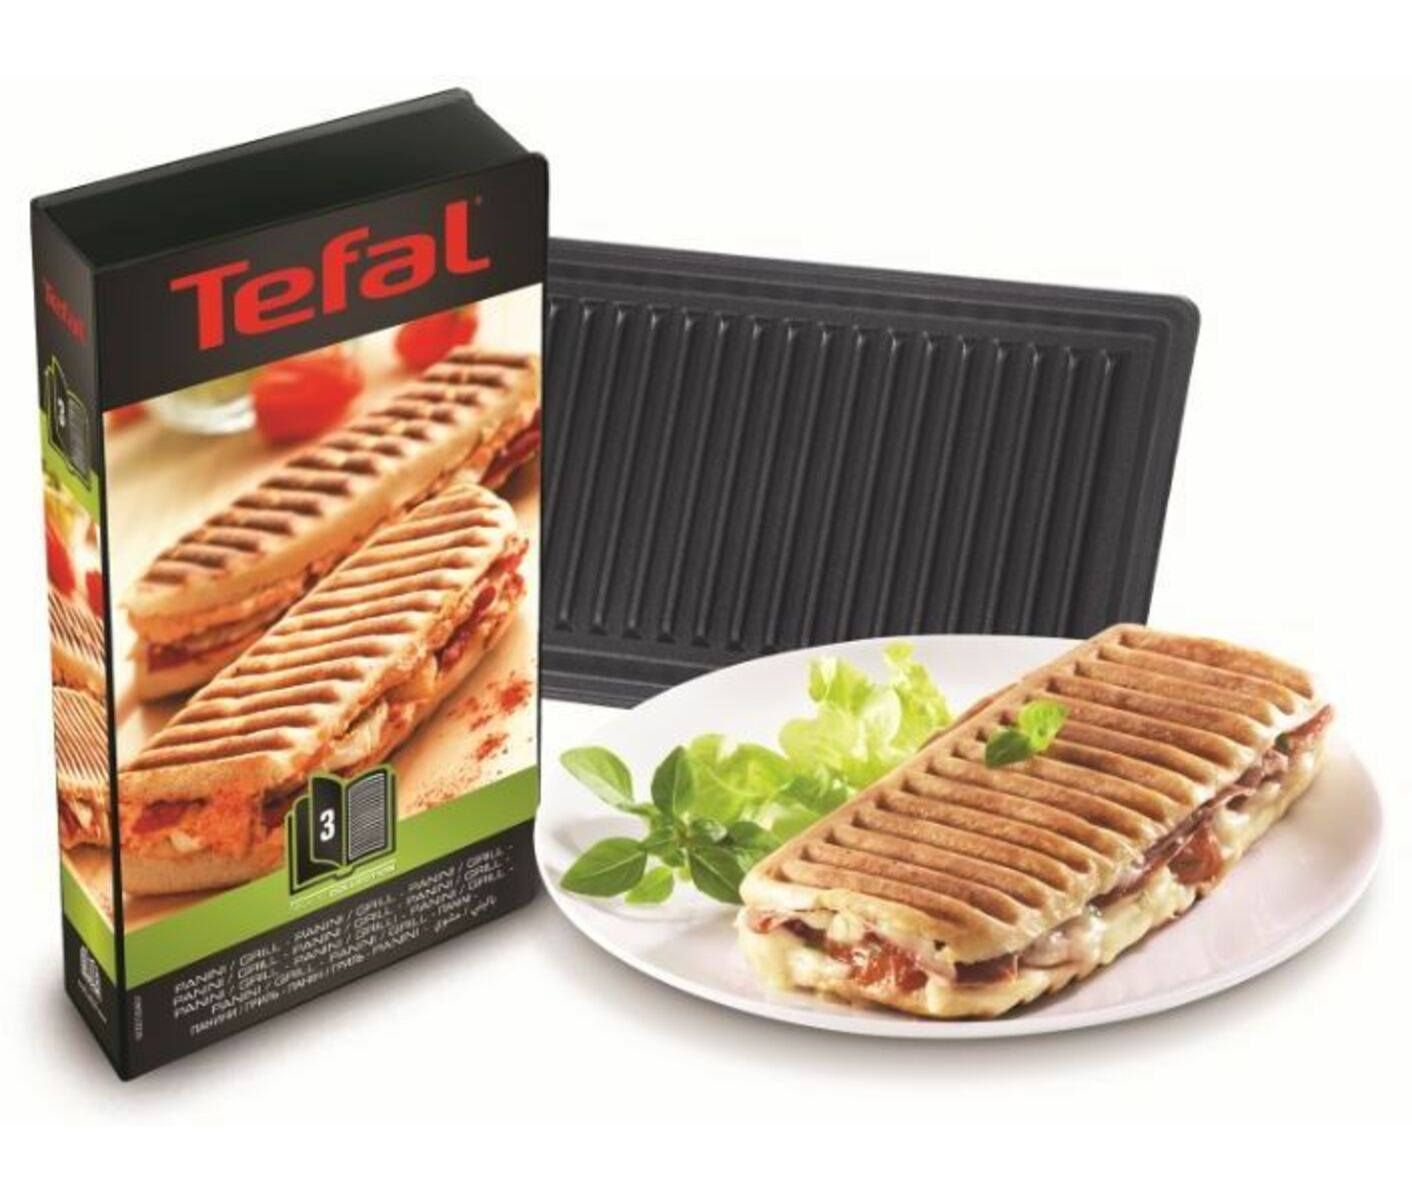 Coffret Snack Collection (Tefal) : Le grill paninis / viandes 